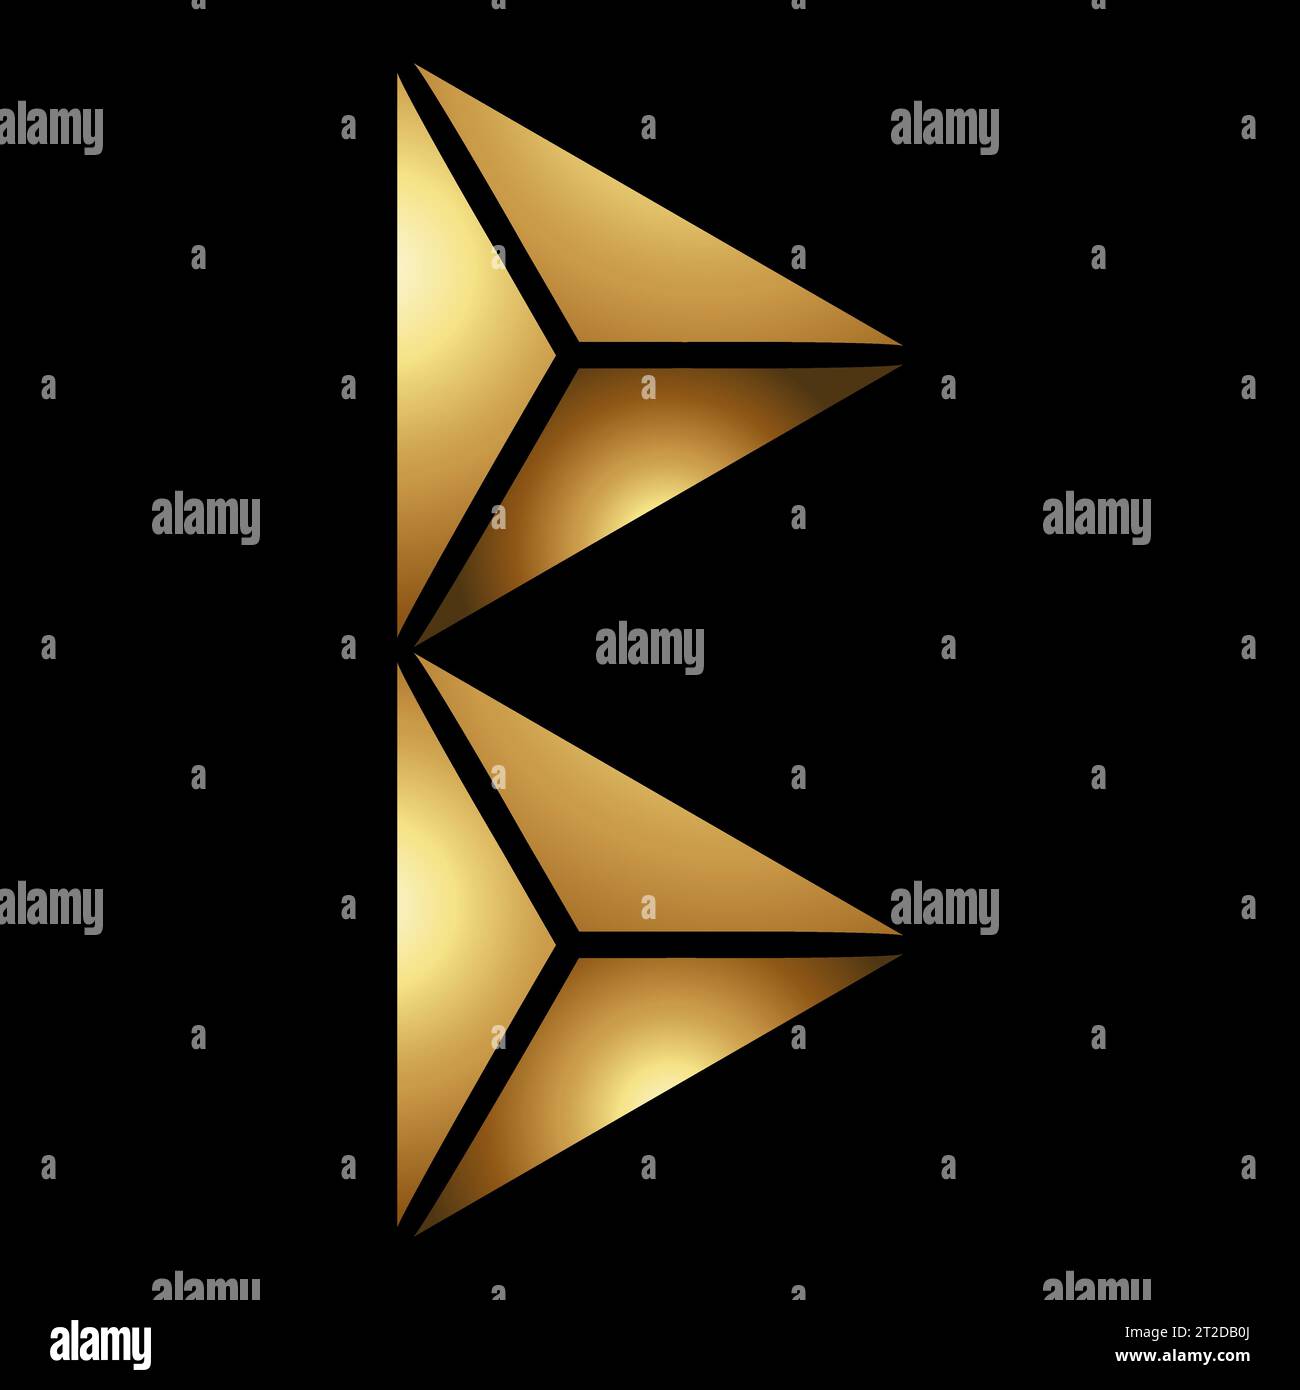 Gold Abstract Pyramidical Letter B Icon on a Black Background Stock Vector